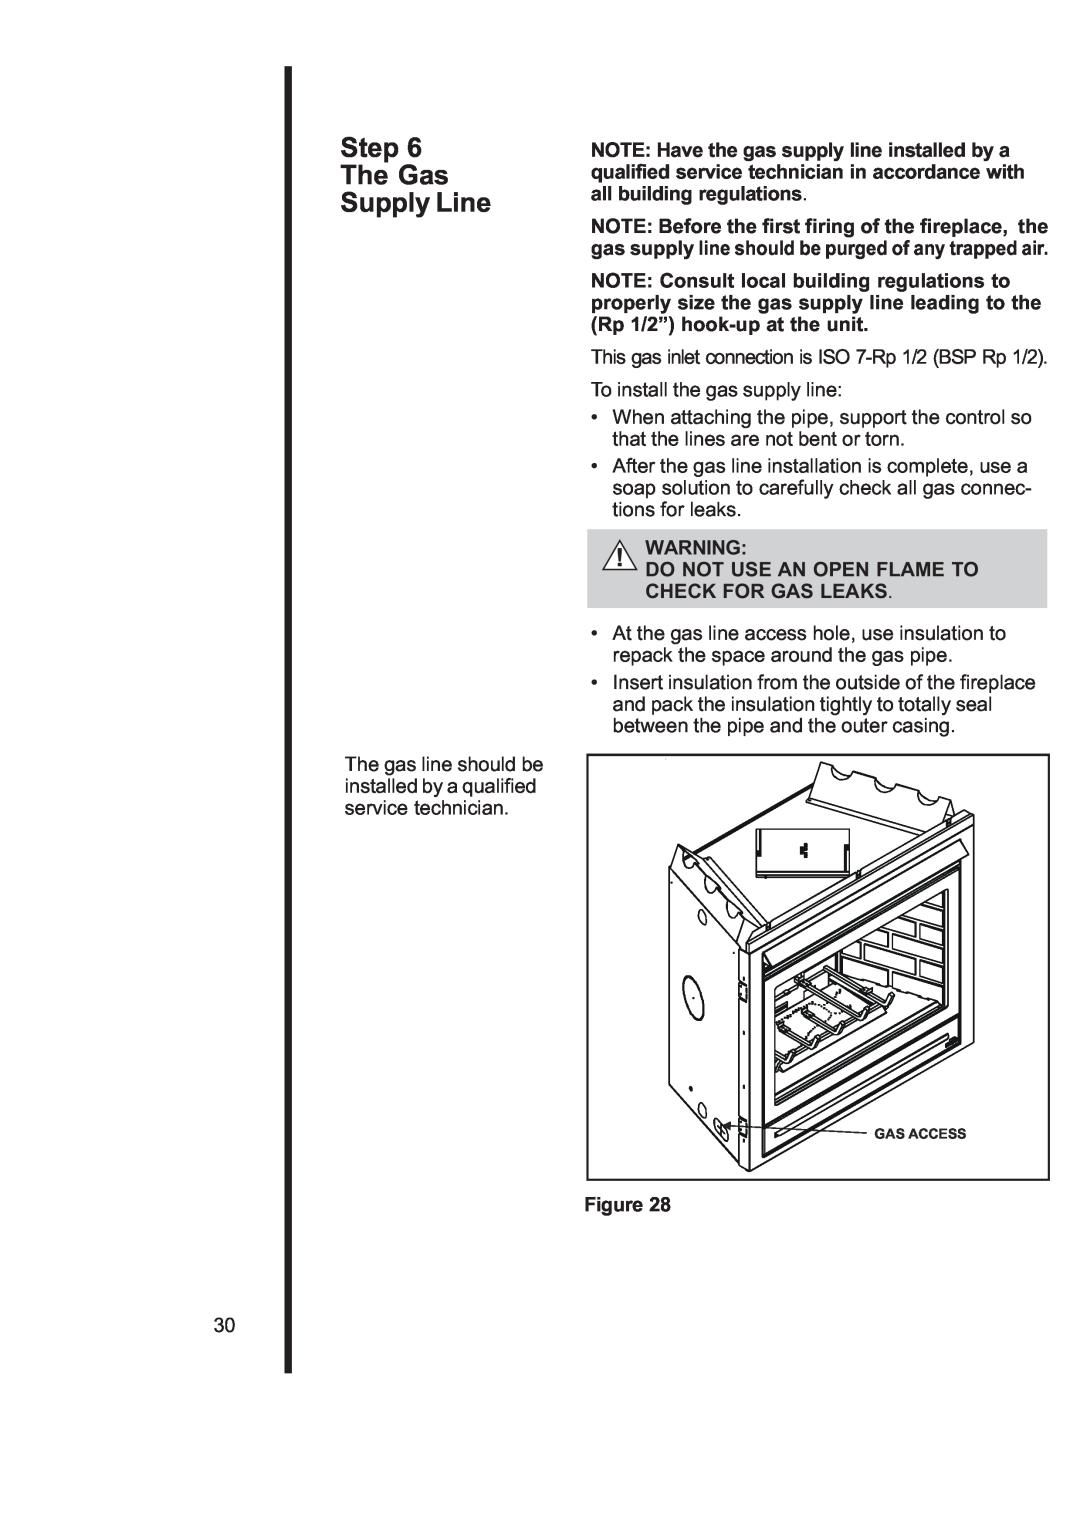 Heat & Glo LifeStyle 6000TRS-CD manual Step The Gas Supply Line, Do Not Use An Open Flame To Check For Gas Leaks 